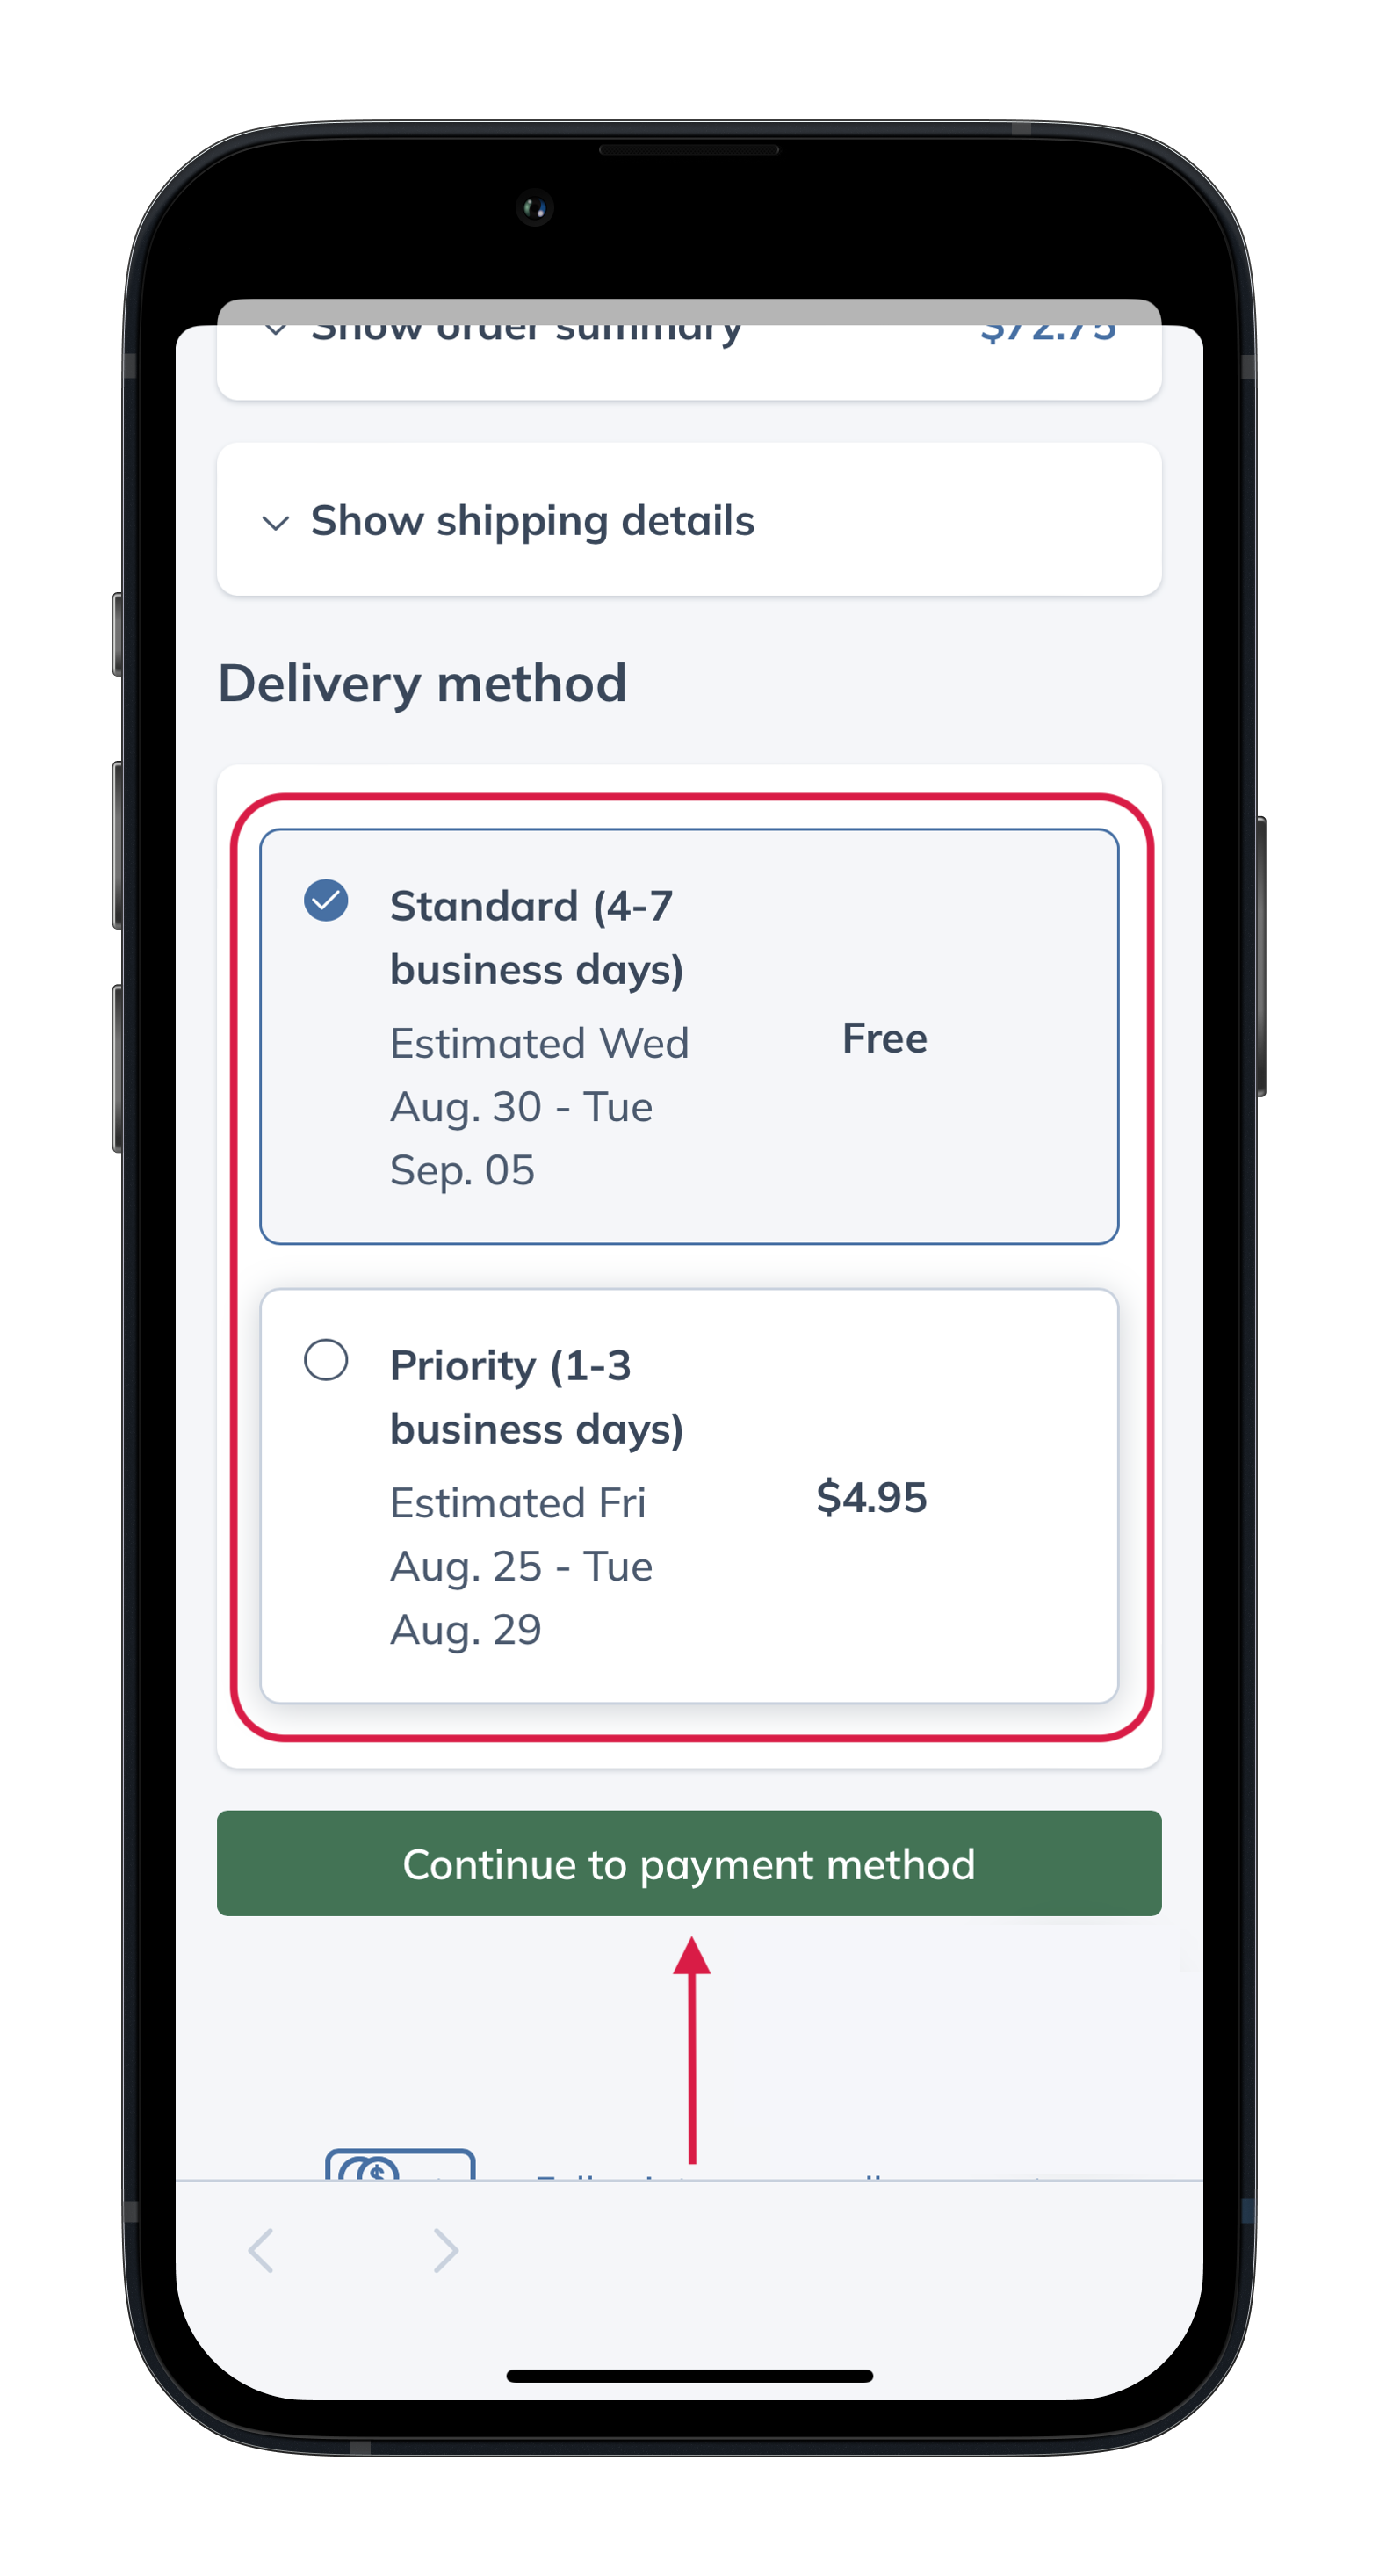 elivery method selection in checkout.